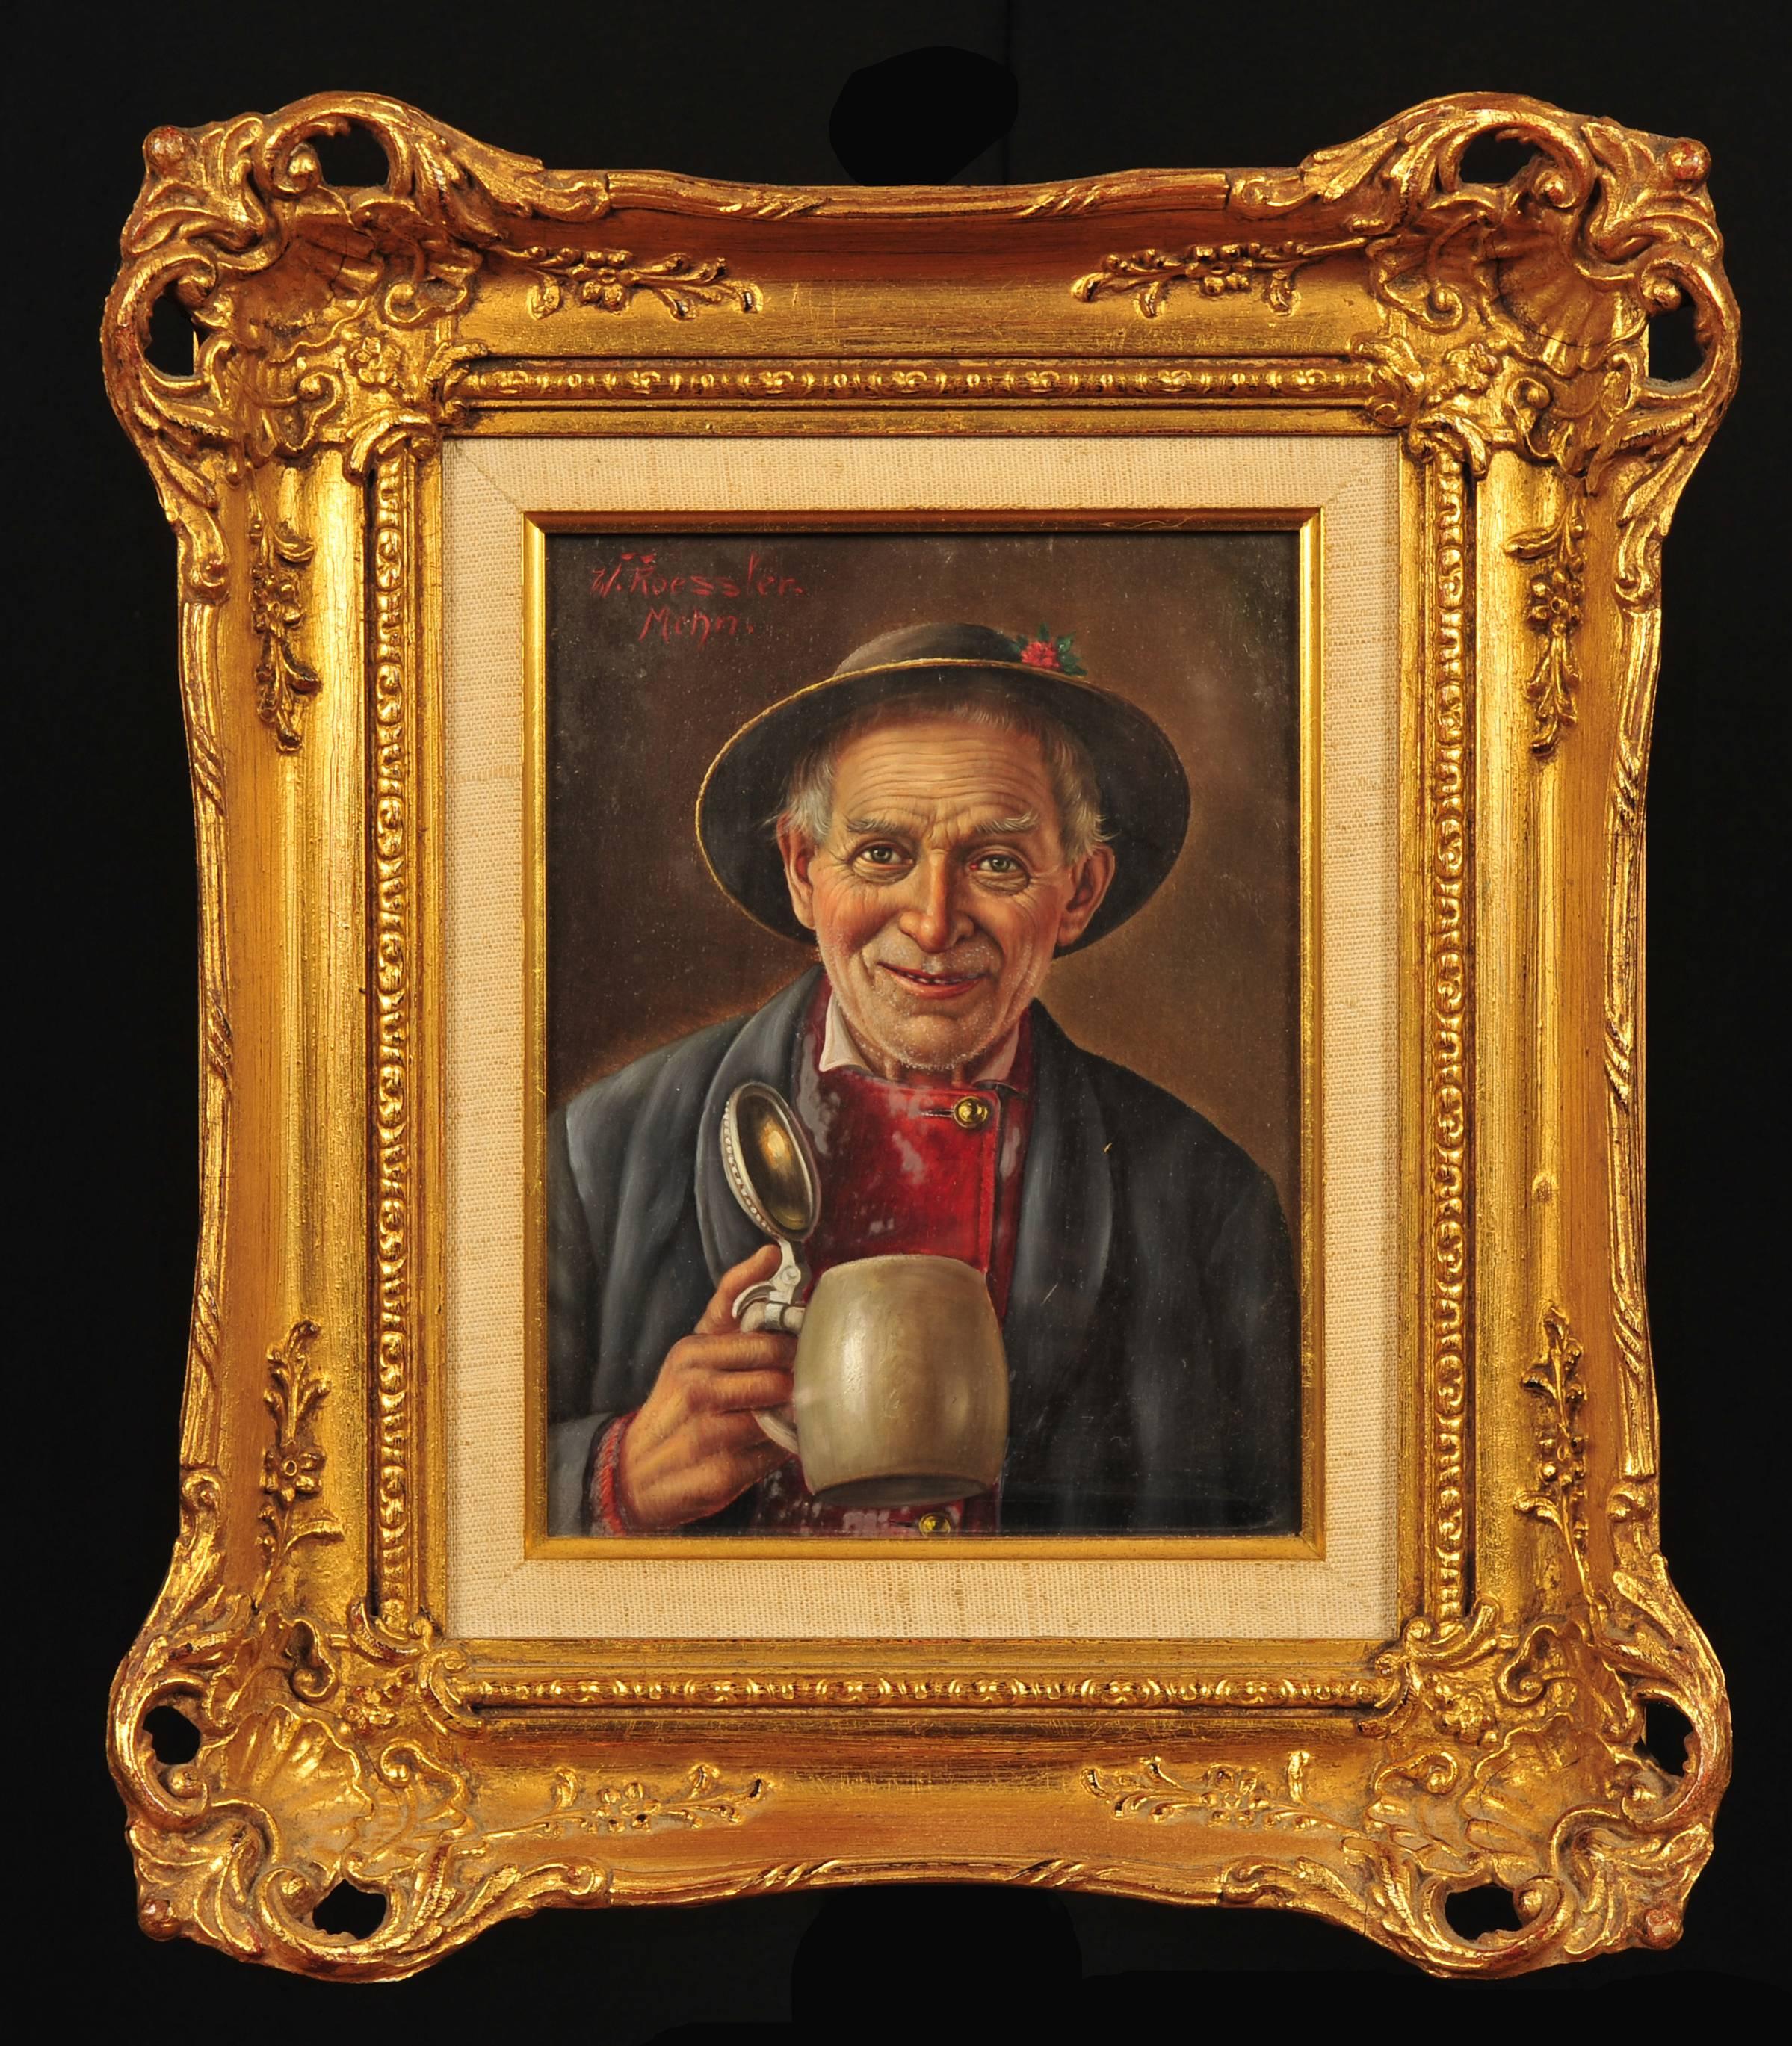 Man with Beer Stein - Painting by Walter Roessler